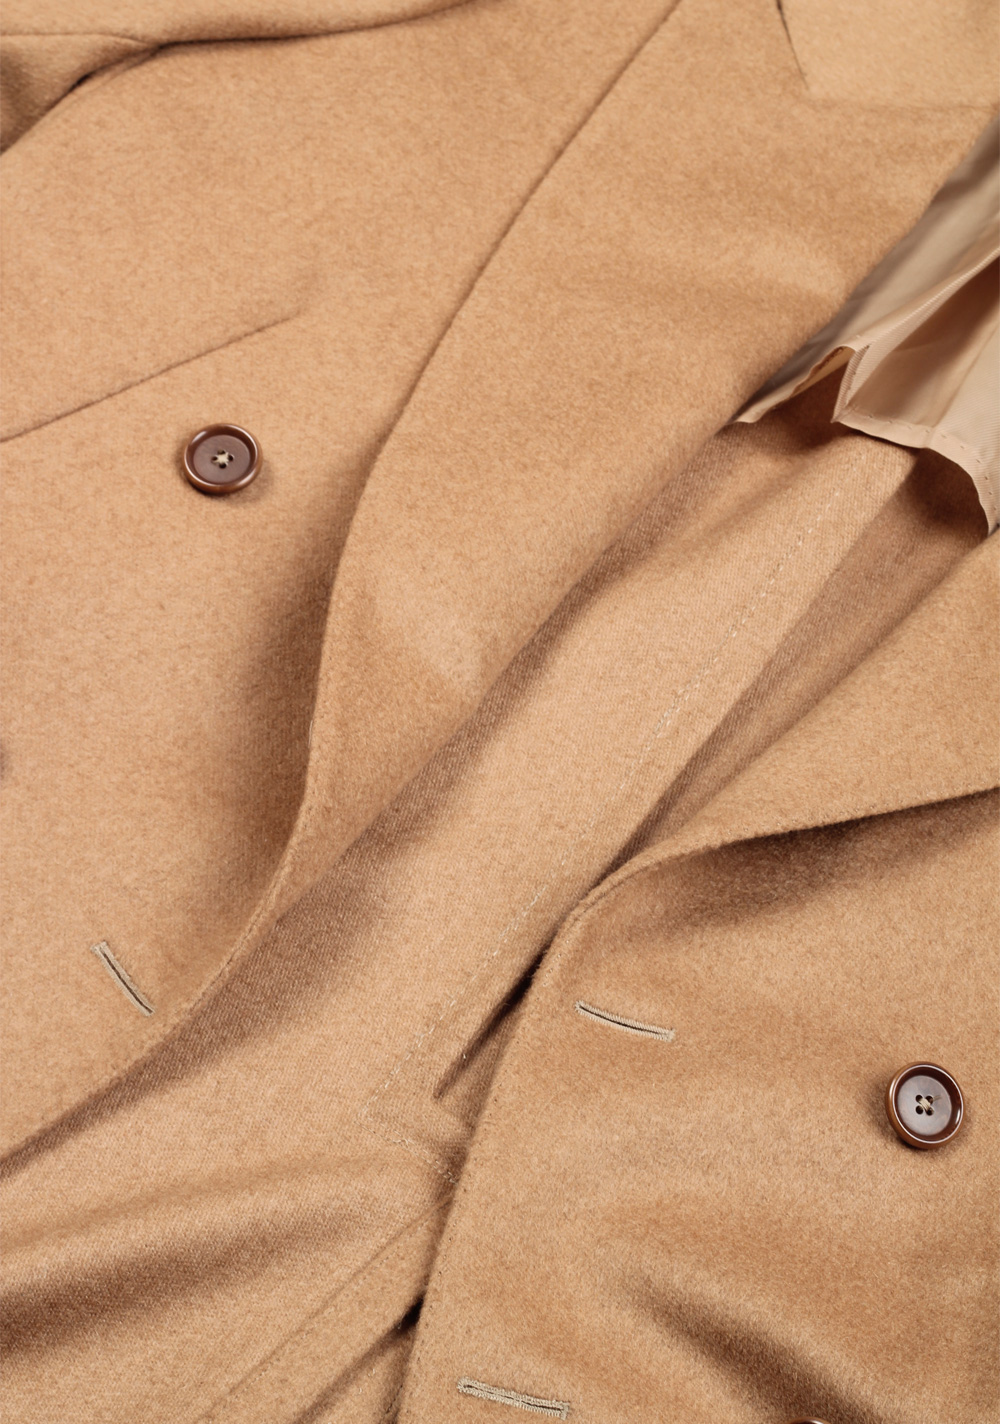 Errico Formicola Camel Double Breasted Over Coat Size 48 / 38R U.S. | Costume Limité